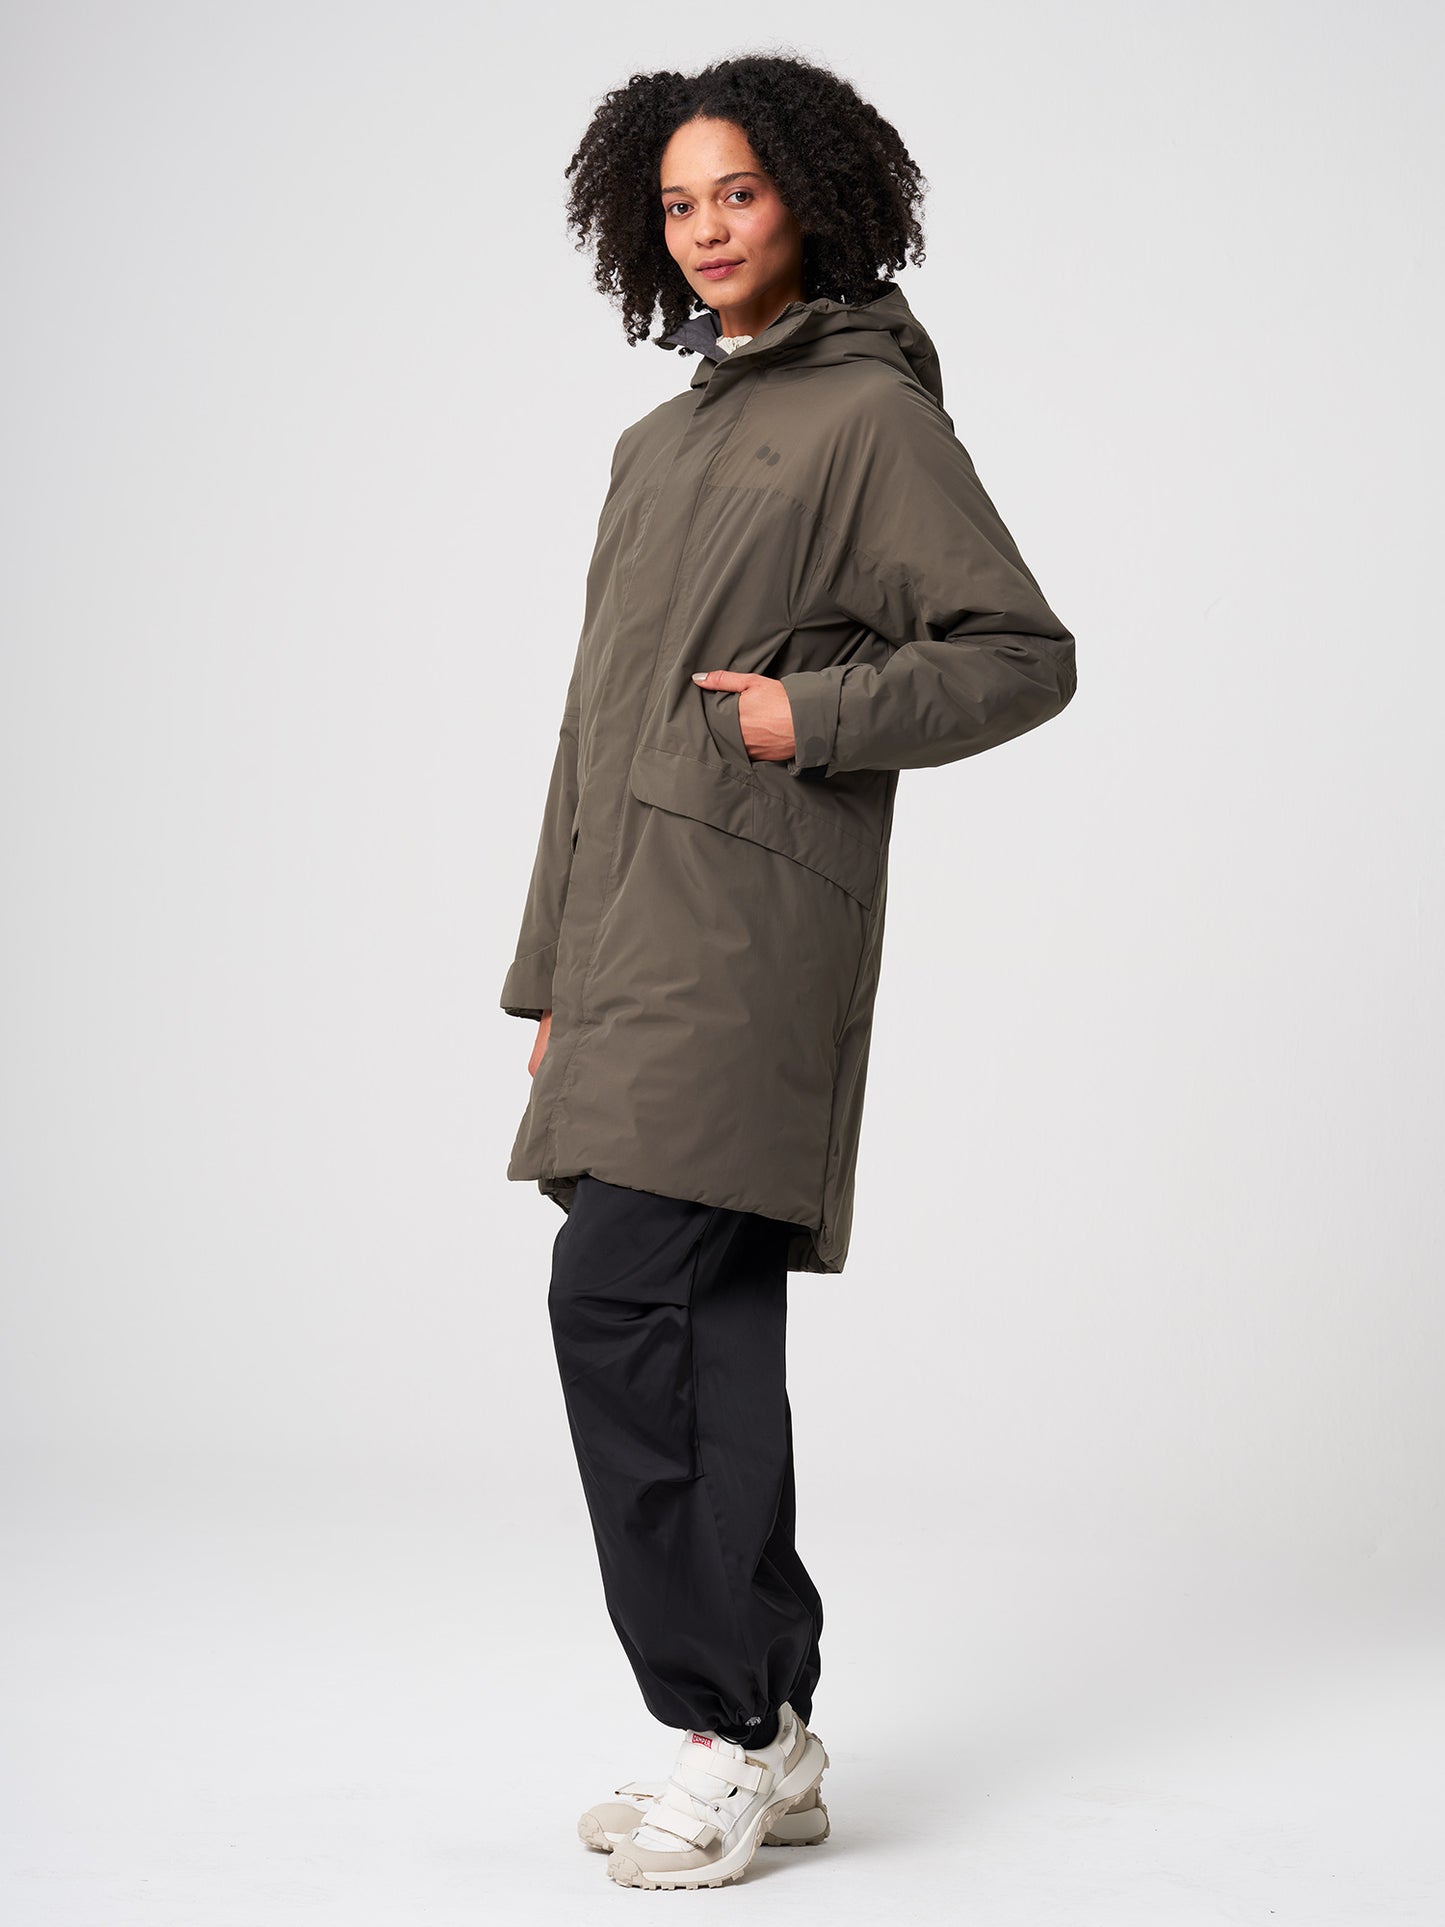 pinqponq-Parka-Unisex-Coffee-Brown-model-side